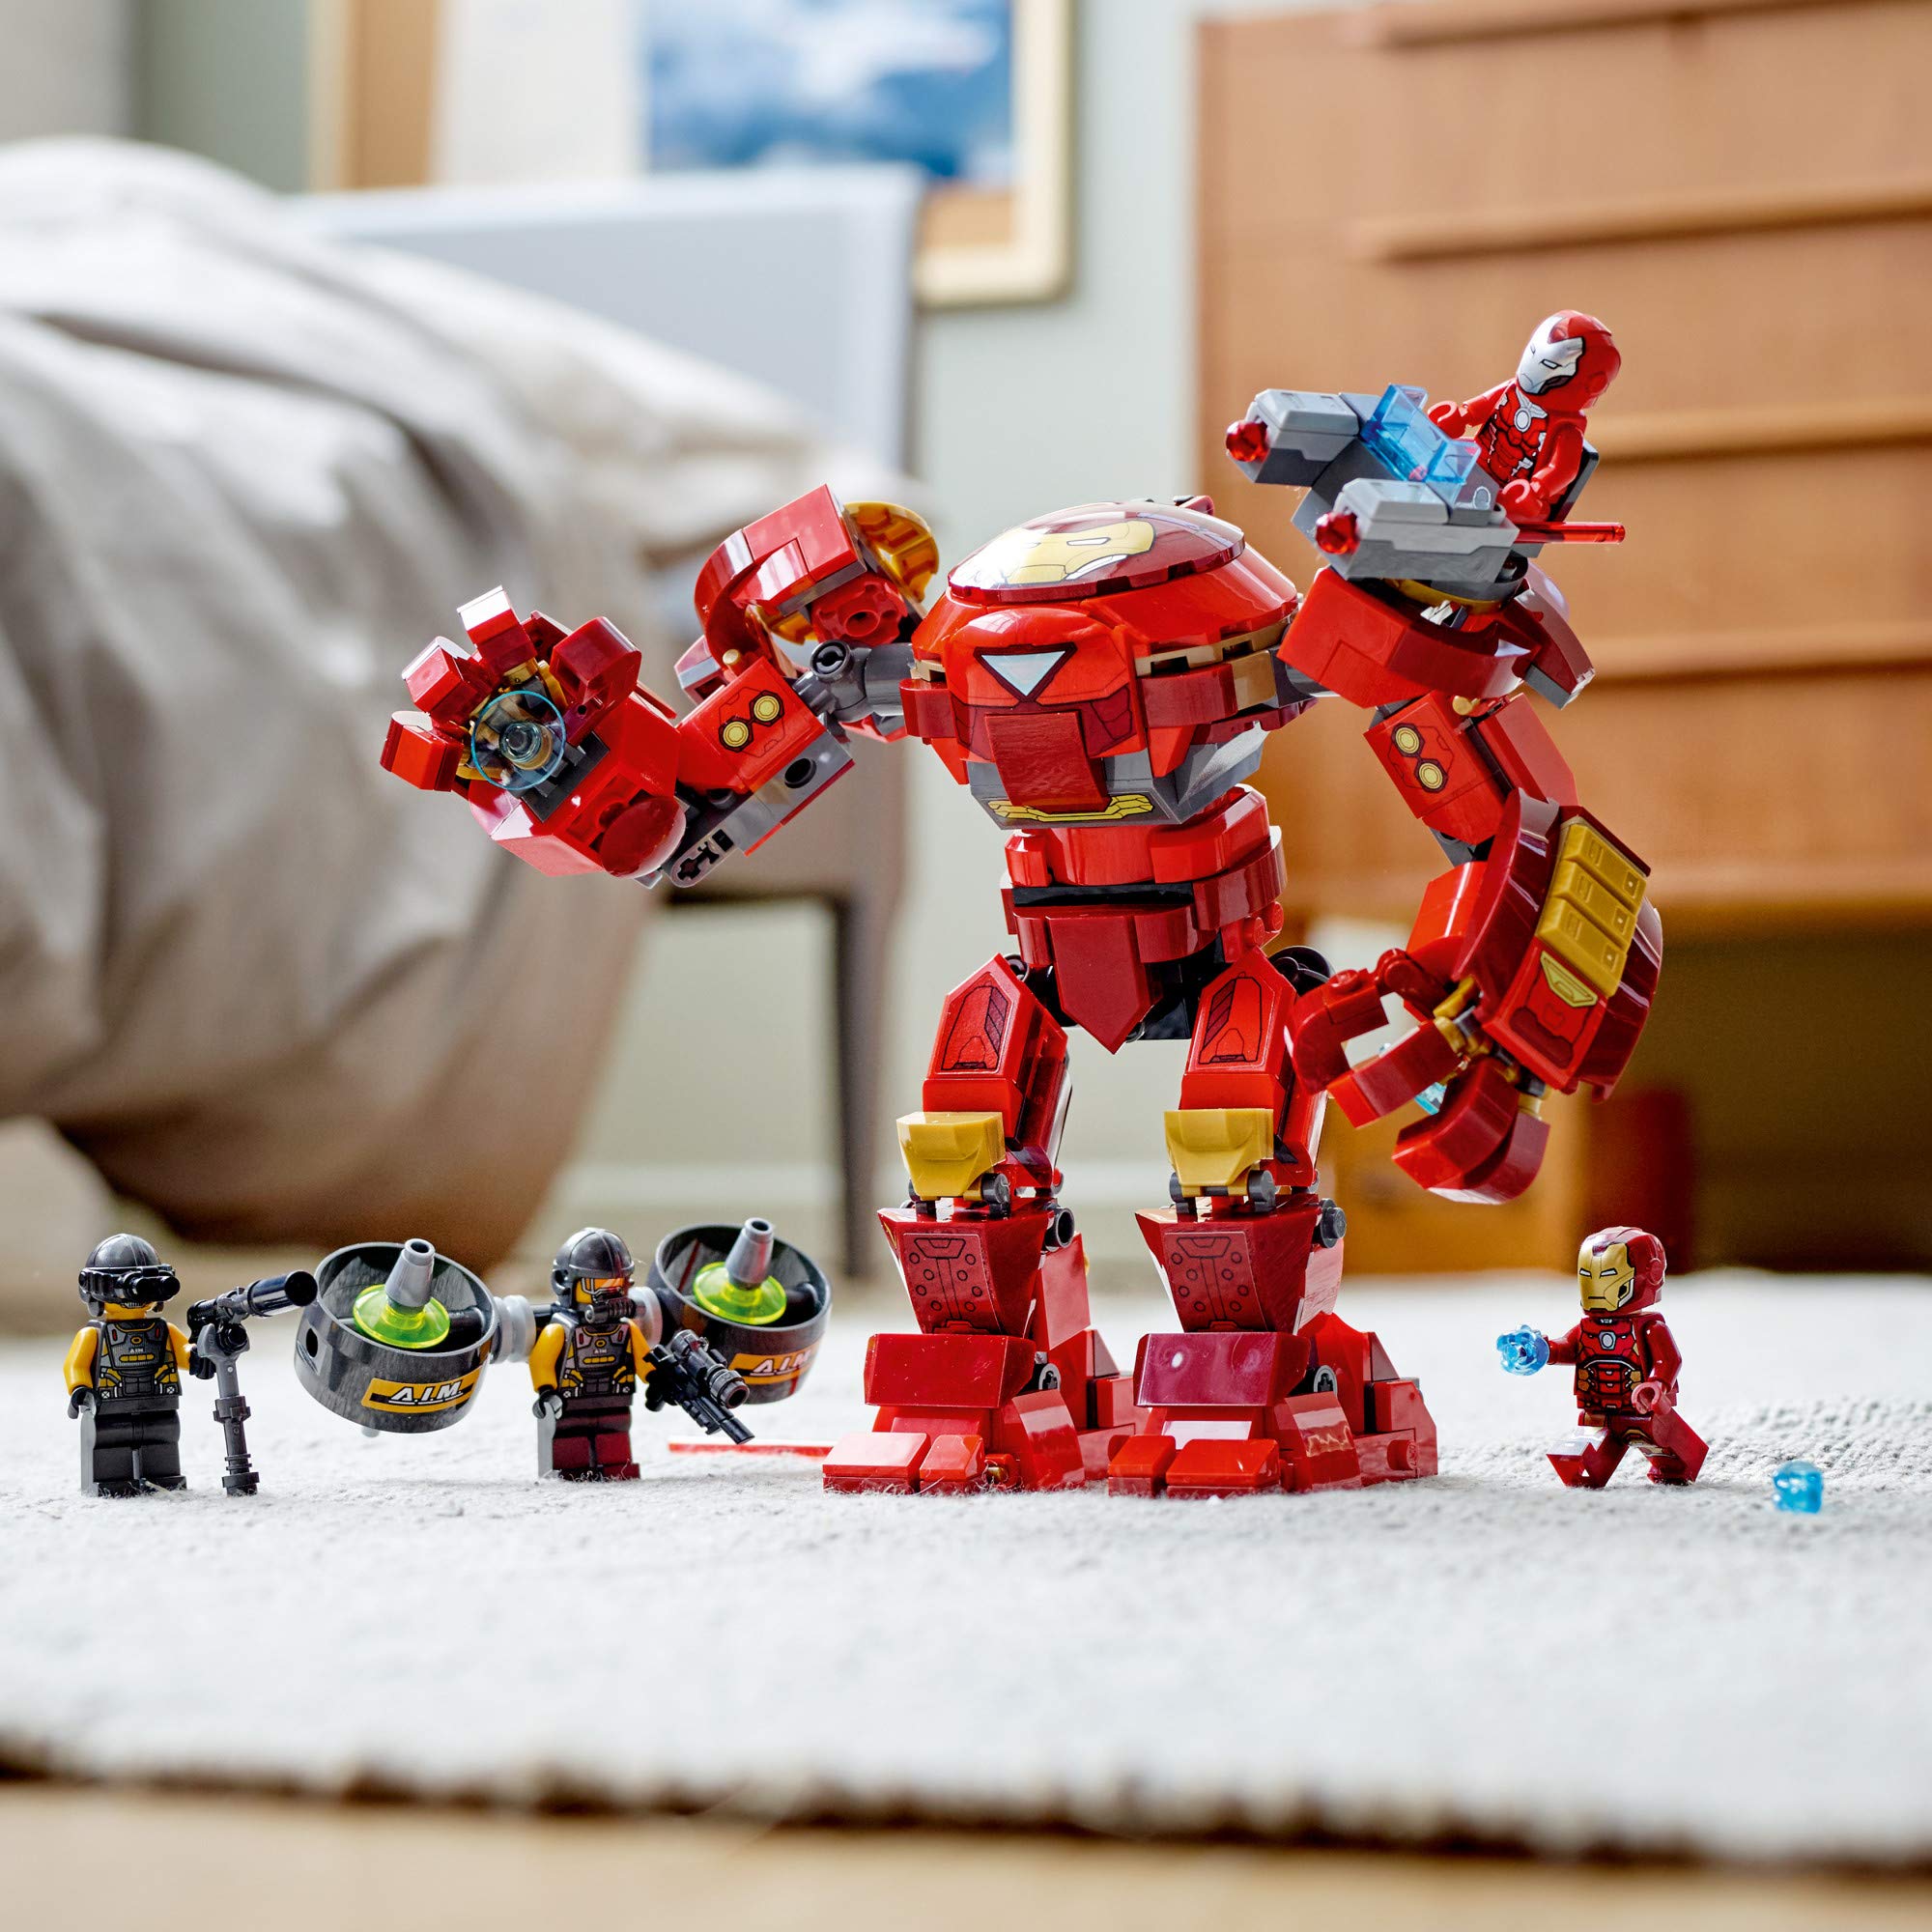 LEGO Marvel Avengers Iron Man Hulkbuster Versus A.I.M. Agent 76164, Cool, Interactive, Brick-Build Avengers Playset with Minifigures (456 Pieces)